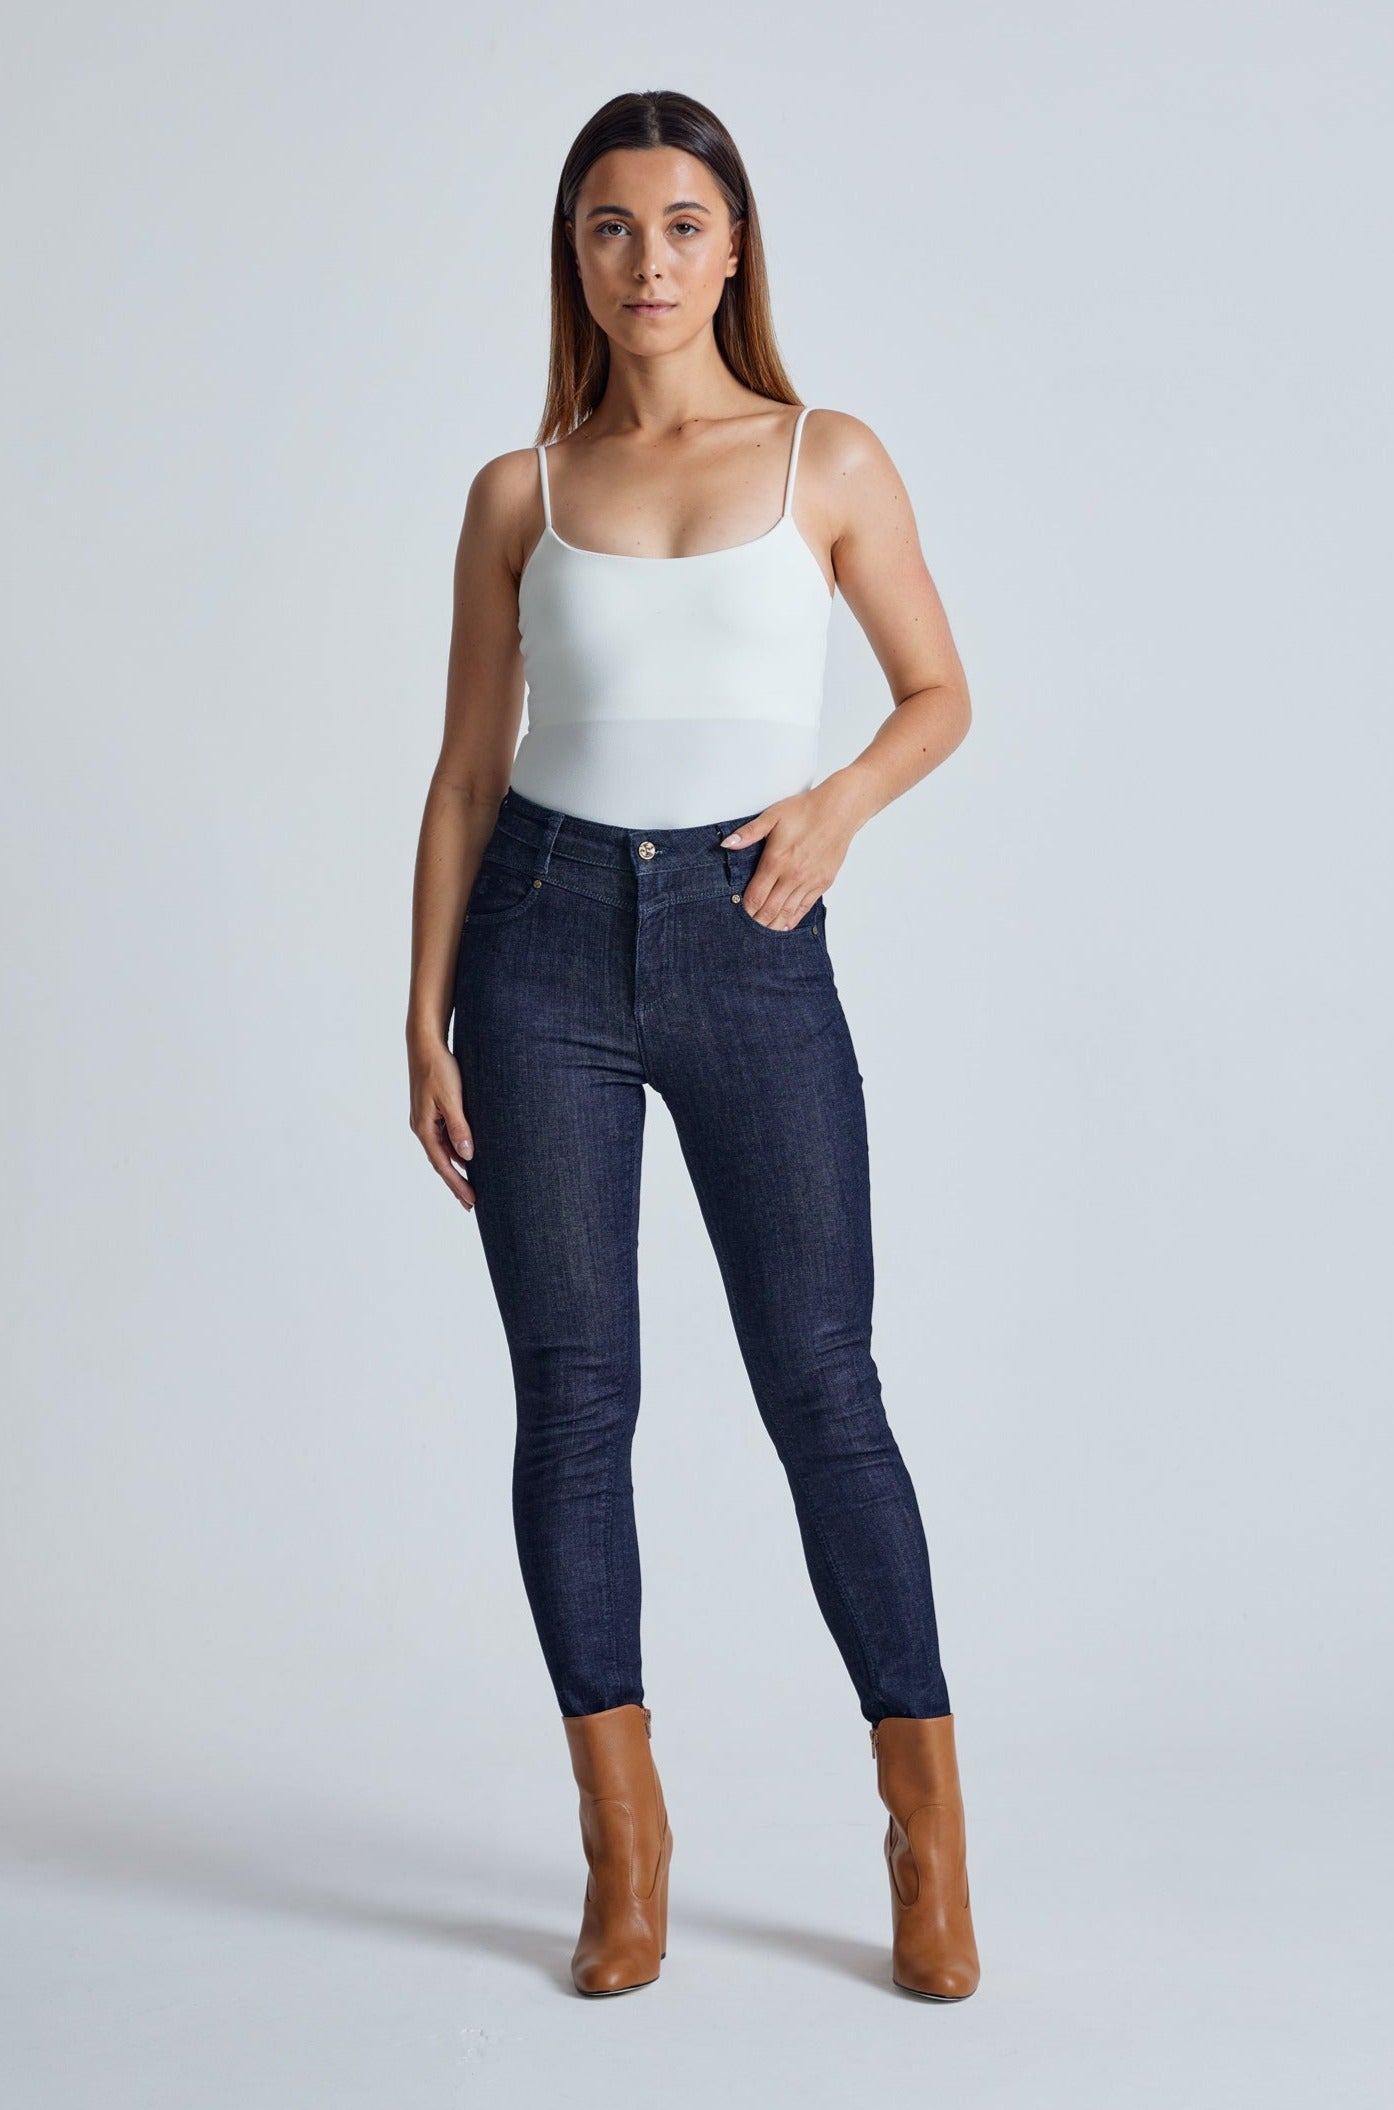 GOTS Certified Organic Jeans: The Sustainable Choice for Fashion